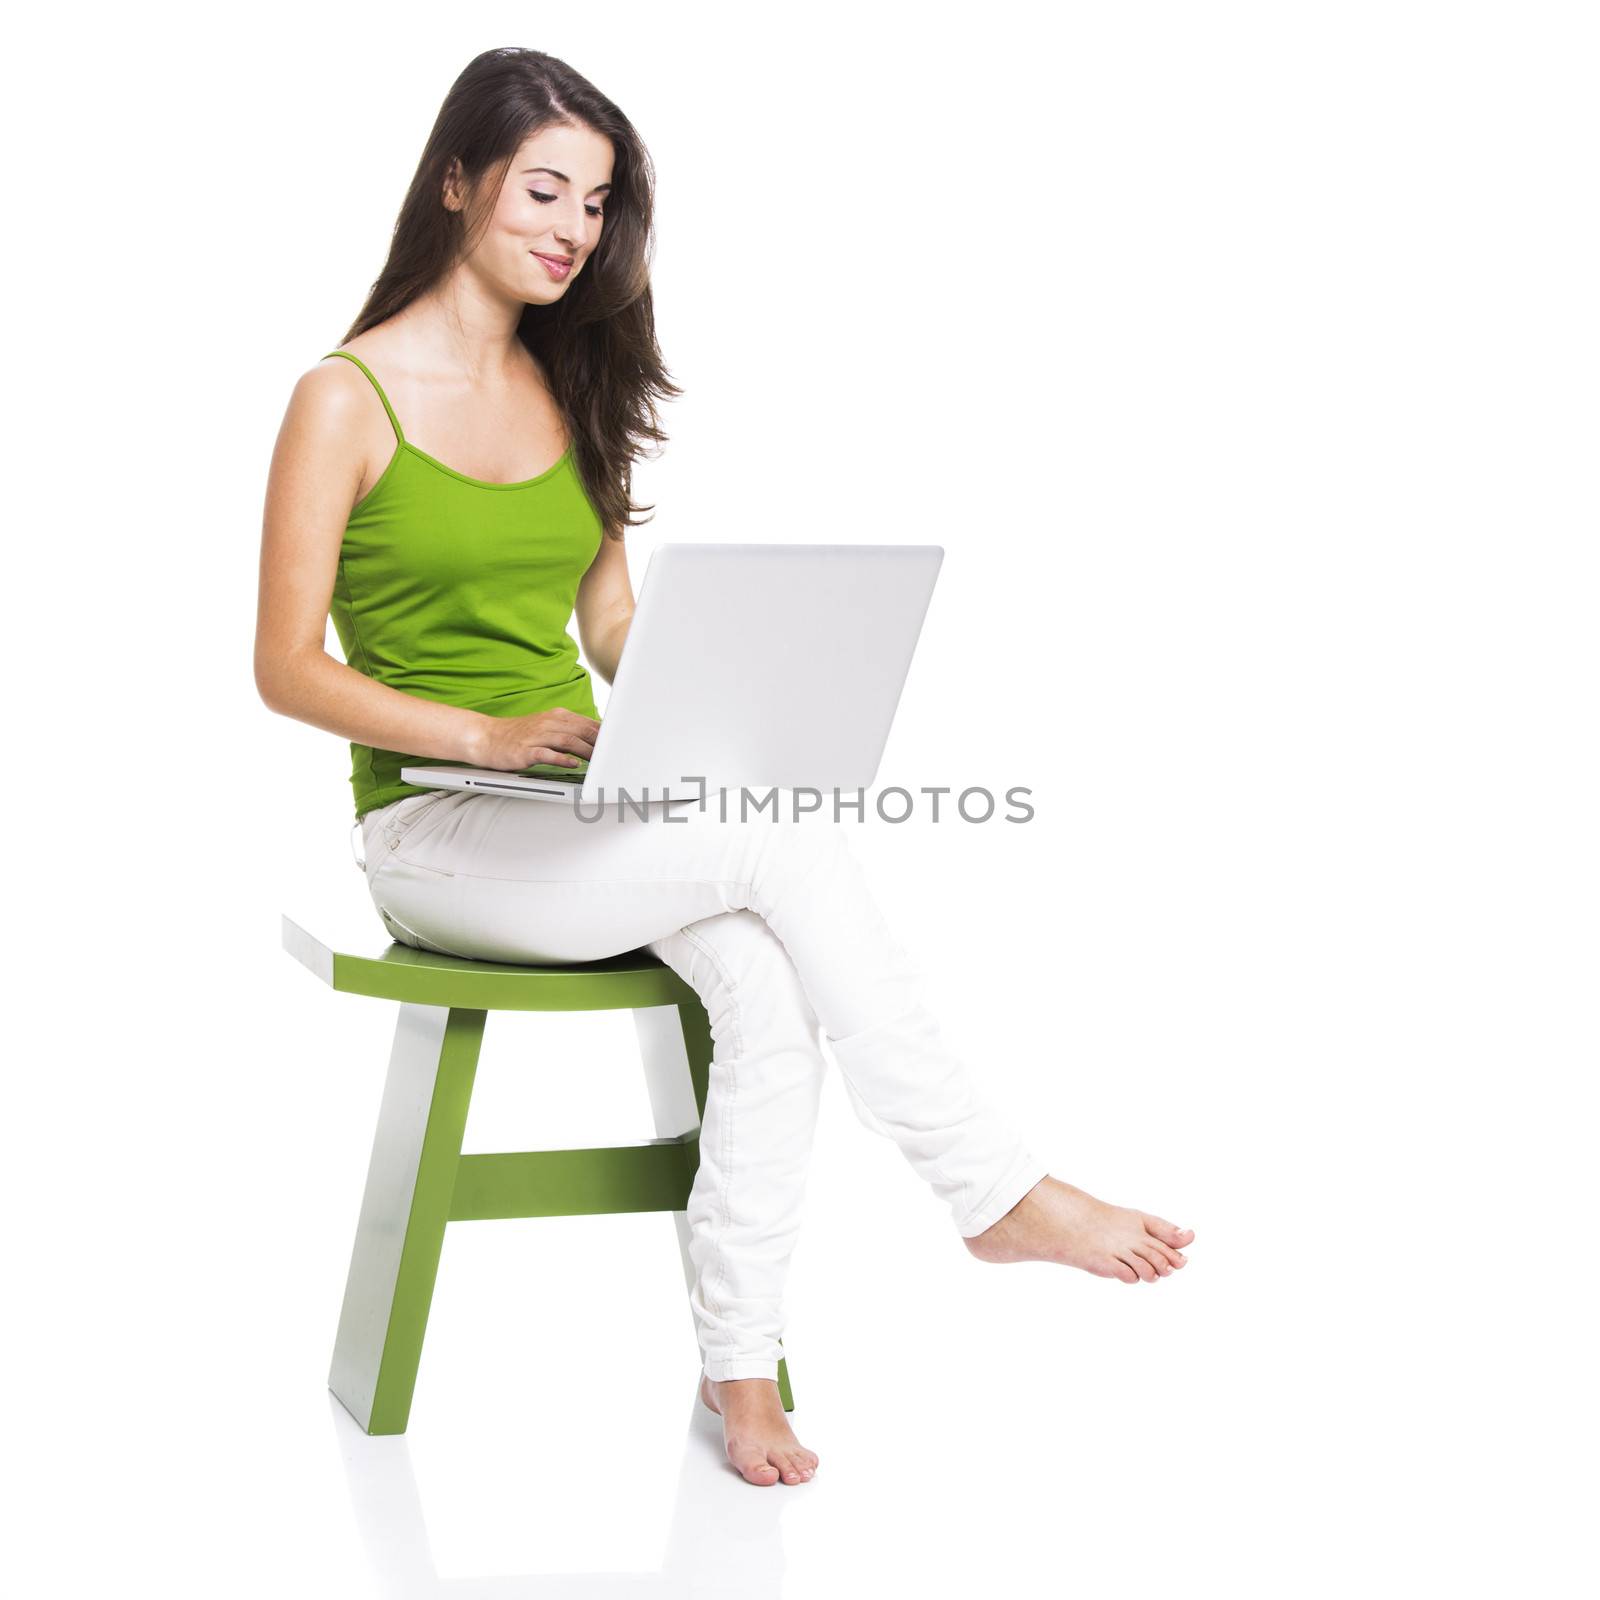 Beautiful woman sitting in a chair working with a laptop, isolated over a white